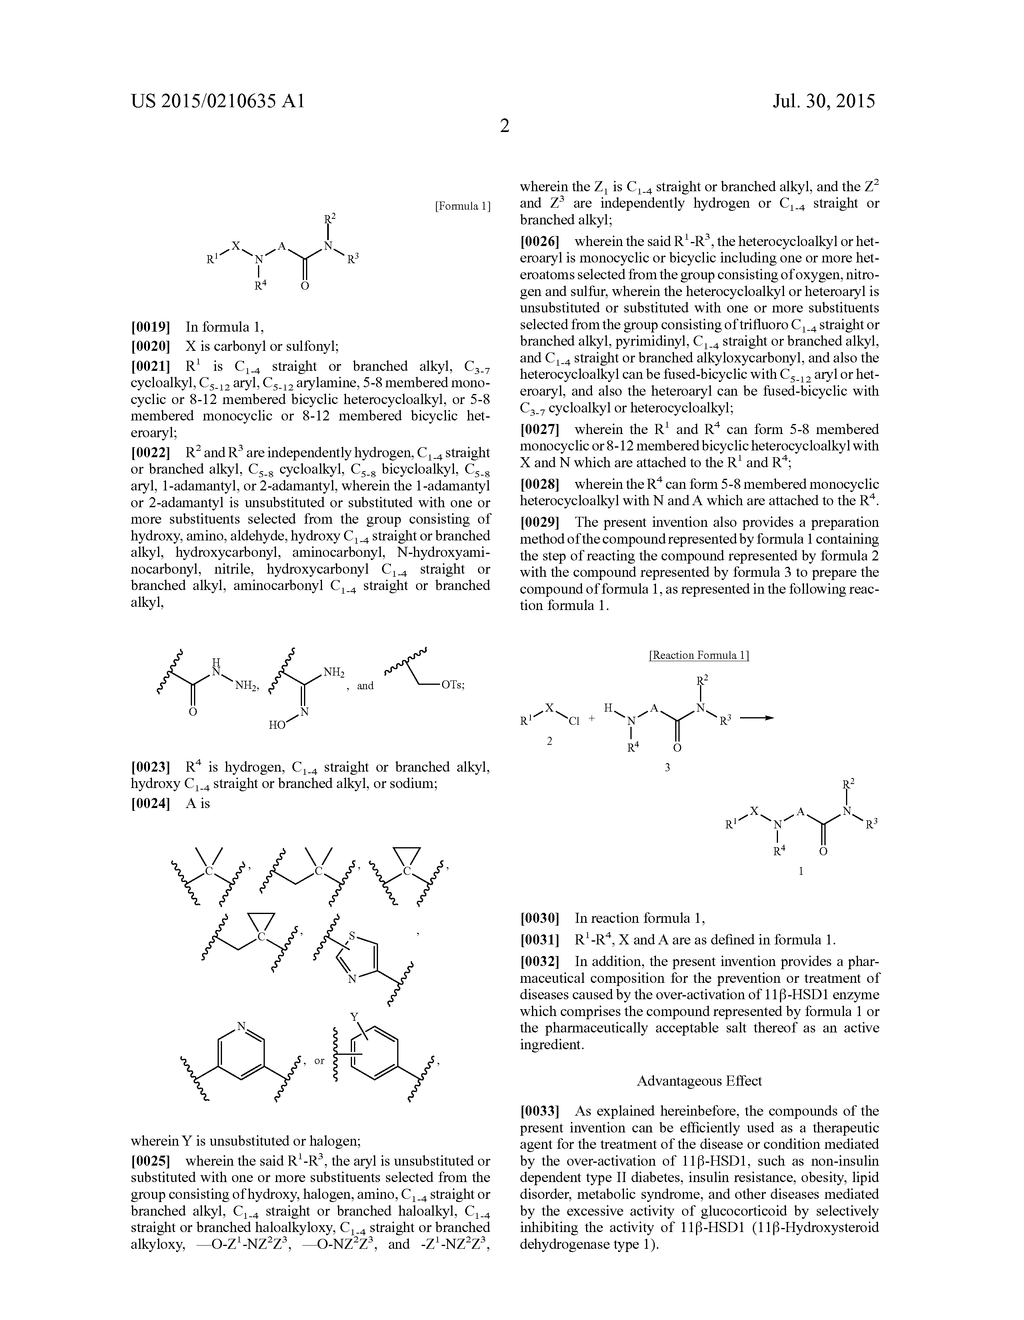 NOVEL COMPOUND HAVING ABILITY TO INHIBIT 11B-HSD1 ENZYME OR     PHARMACEUTICALLY ACCEPTABLE SALT THEREOF, METHOD FOR PRODUCING SAME, AND     PHARMACEUTICAL COMPOSITION CONTAINING SAME AS ACTIVE INGREDIENT - diagram, schematic, and image 03